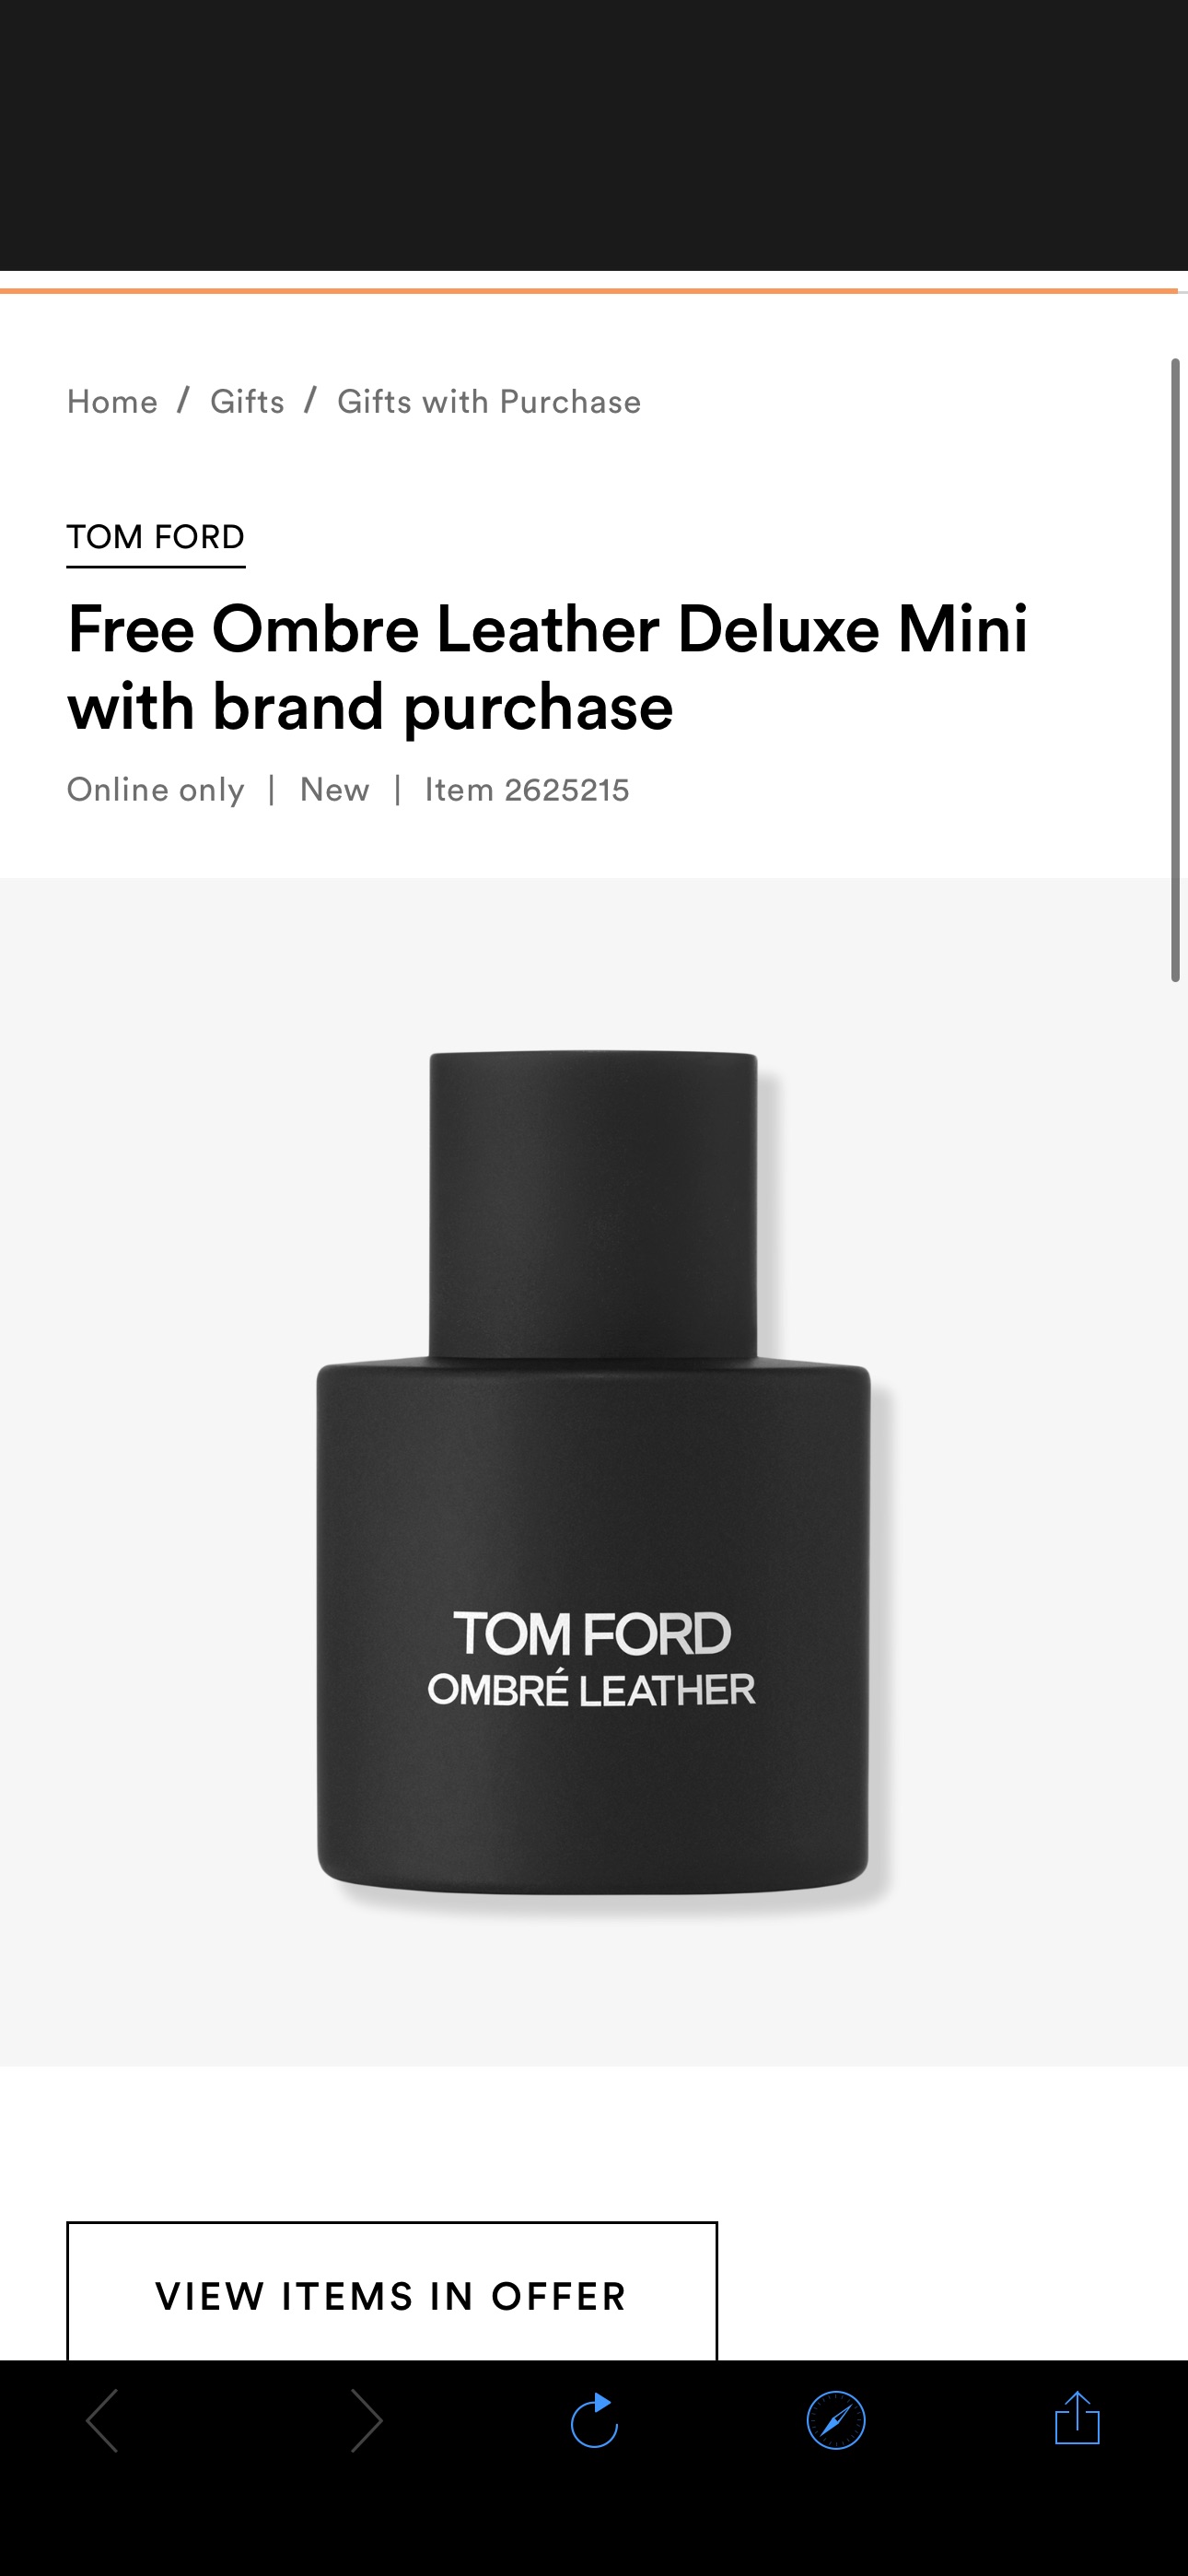 Free Ombre Leather Deluxe Mini with brand purchase - TOM FORD | Ulta Beauty